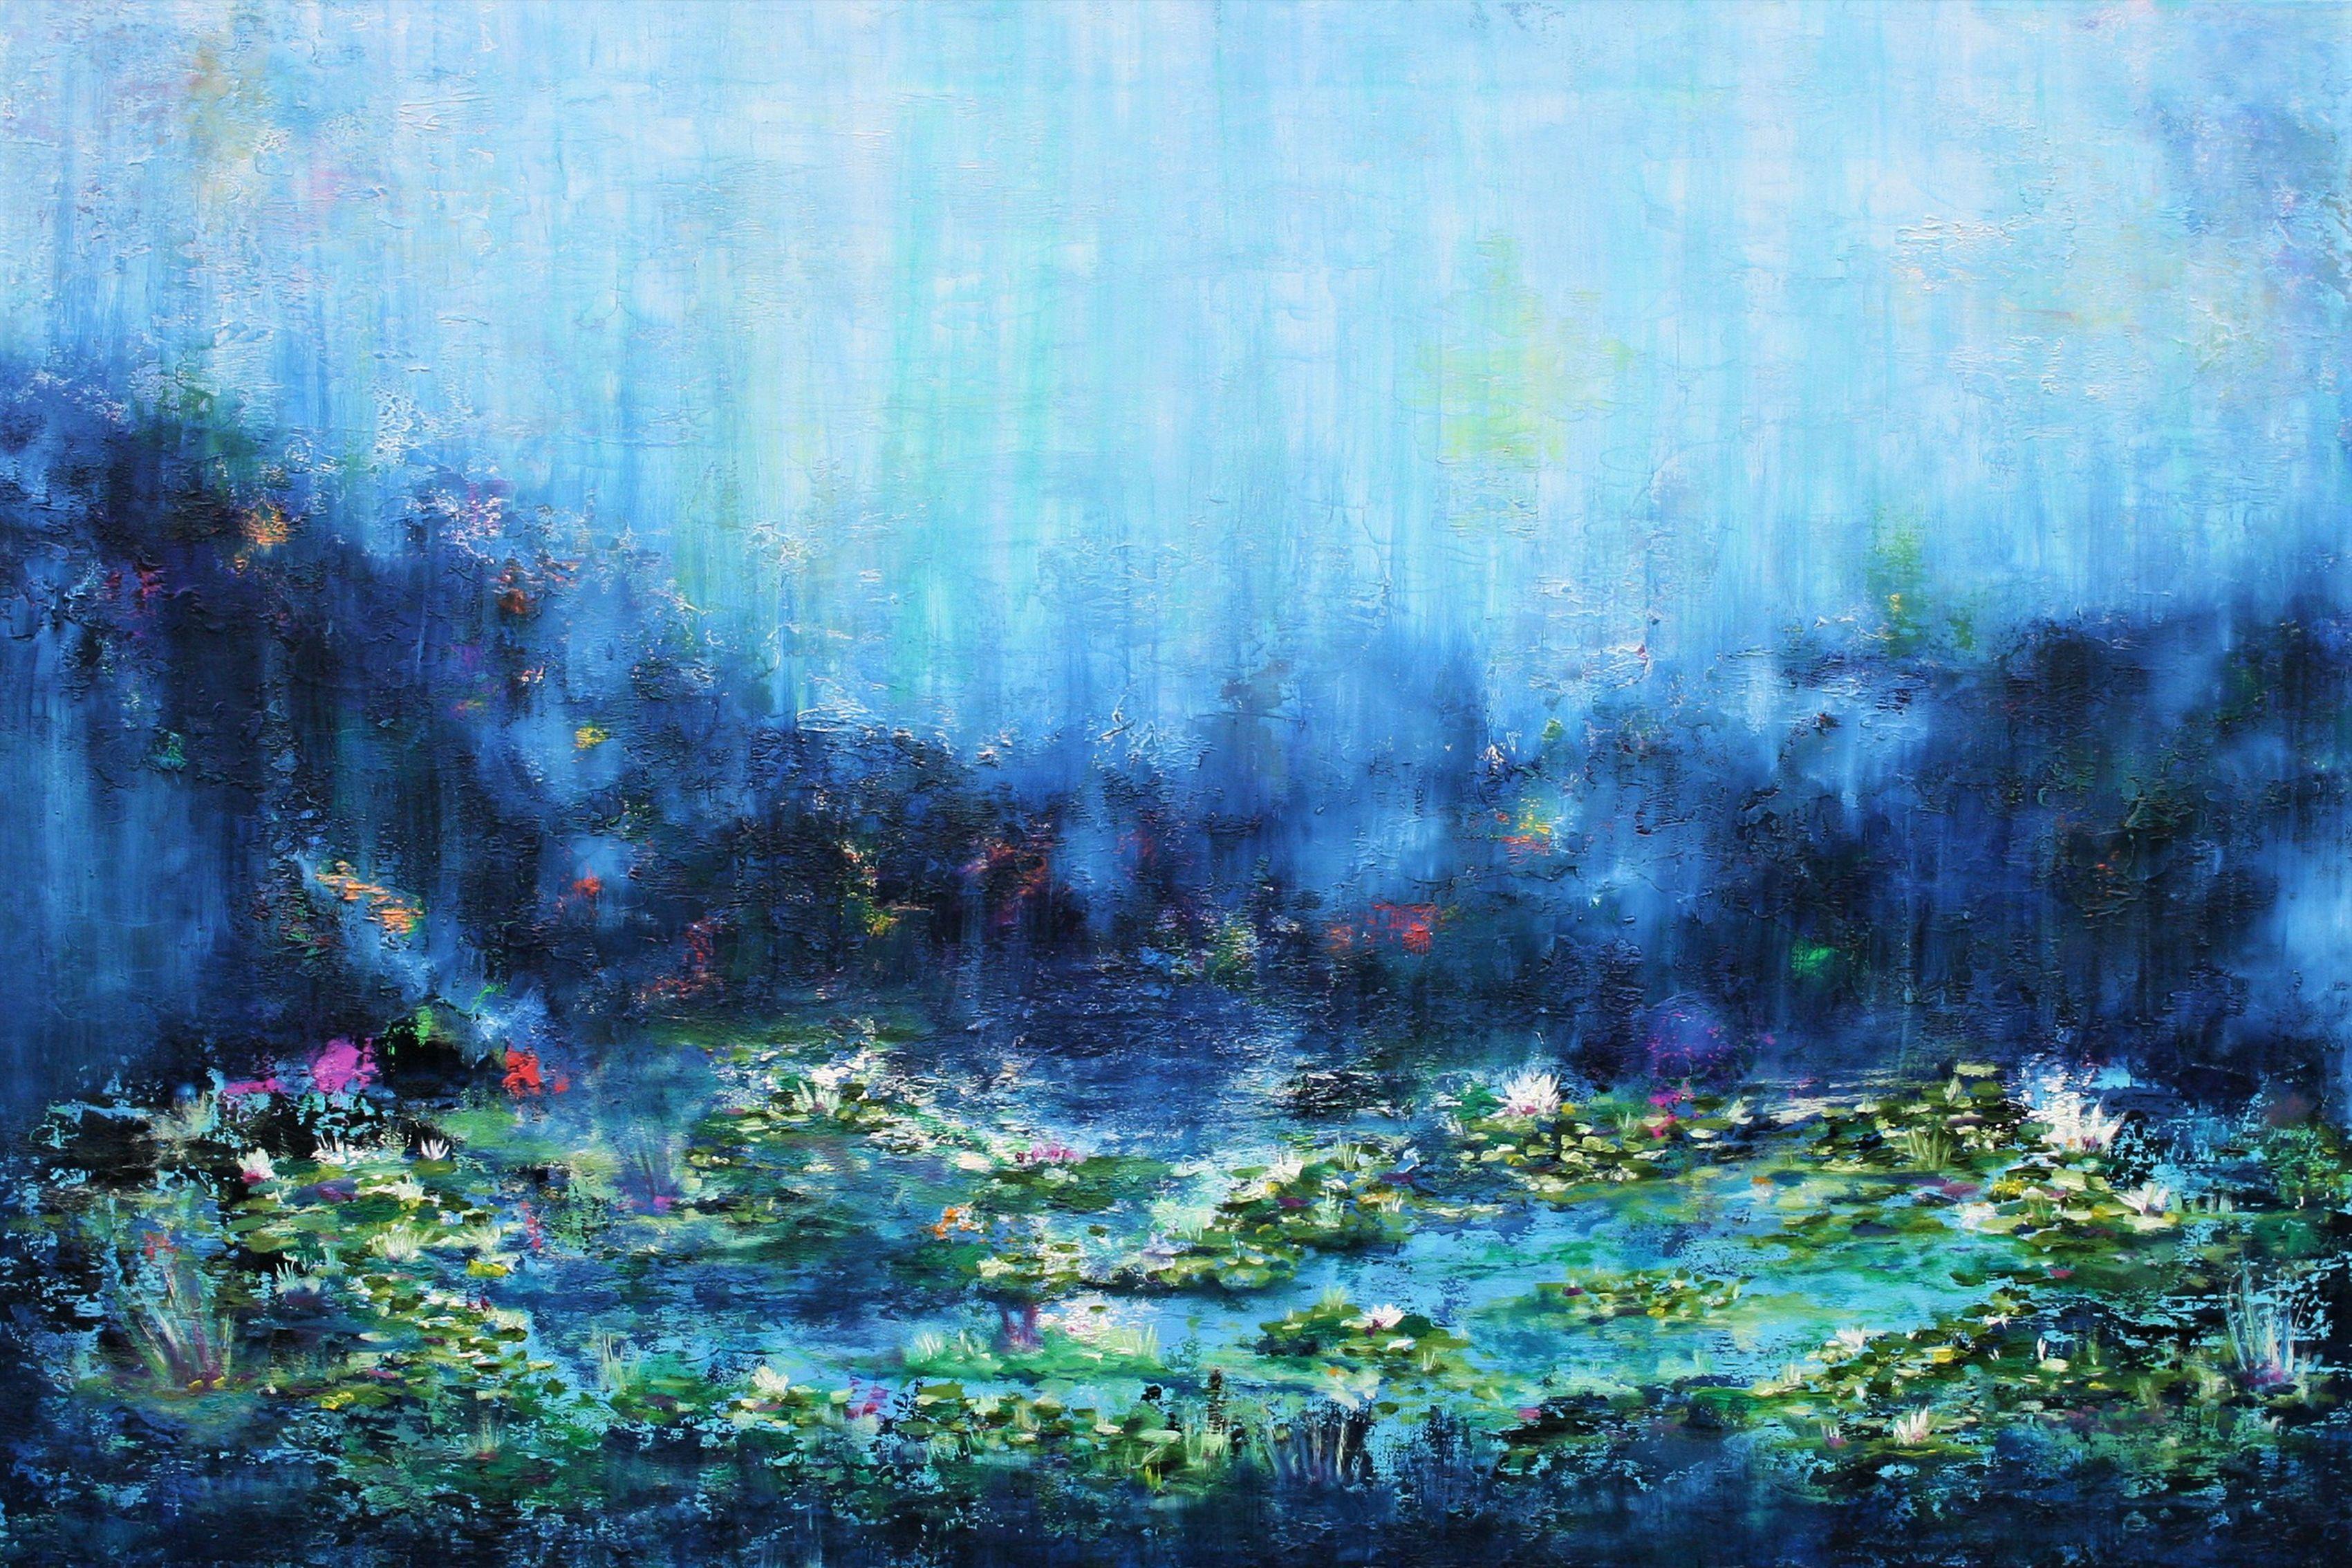 Large Water Lilies 120 x 80 cm Oil Painting, Painting, Watercolor on Canvas - Art by Susan Wooler